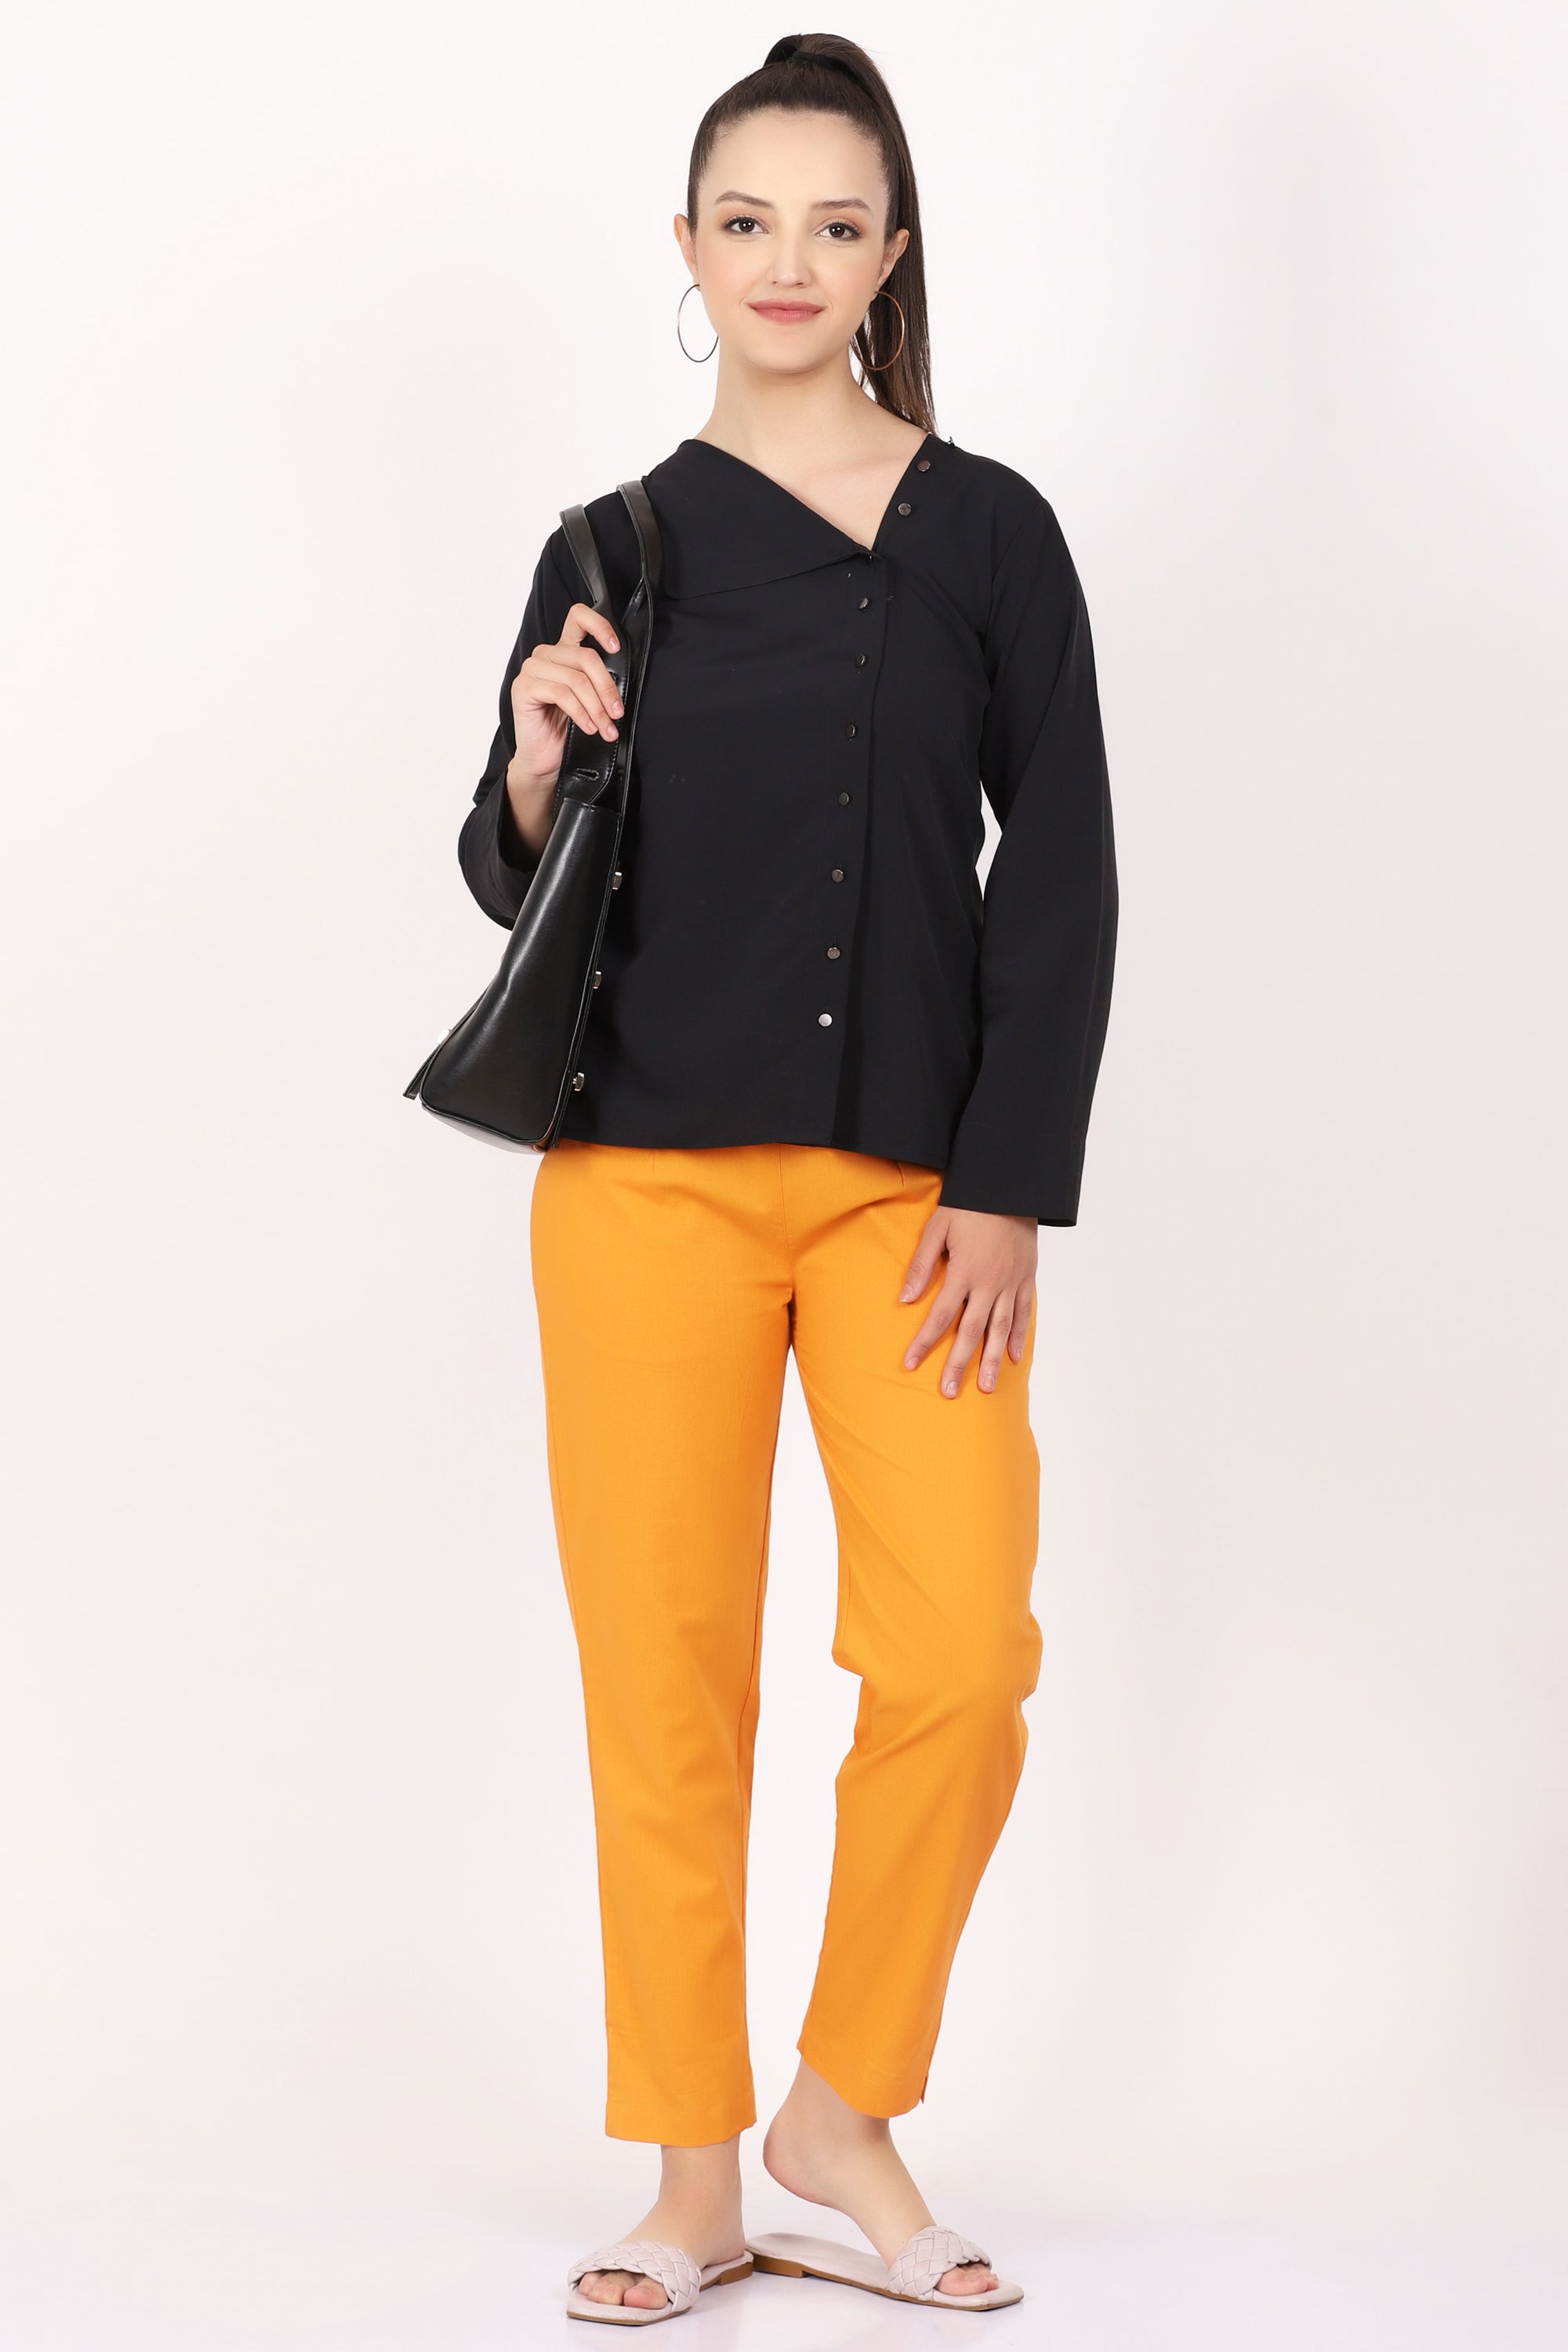 a man wearing a yellow shirt and black pants Stock Photo by Icons8